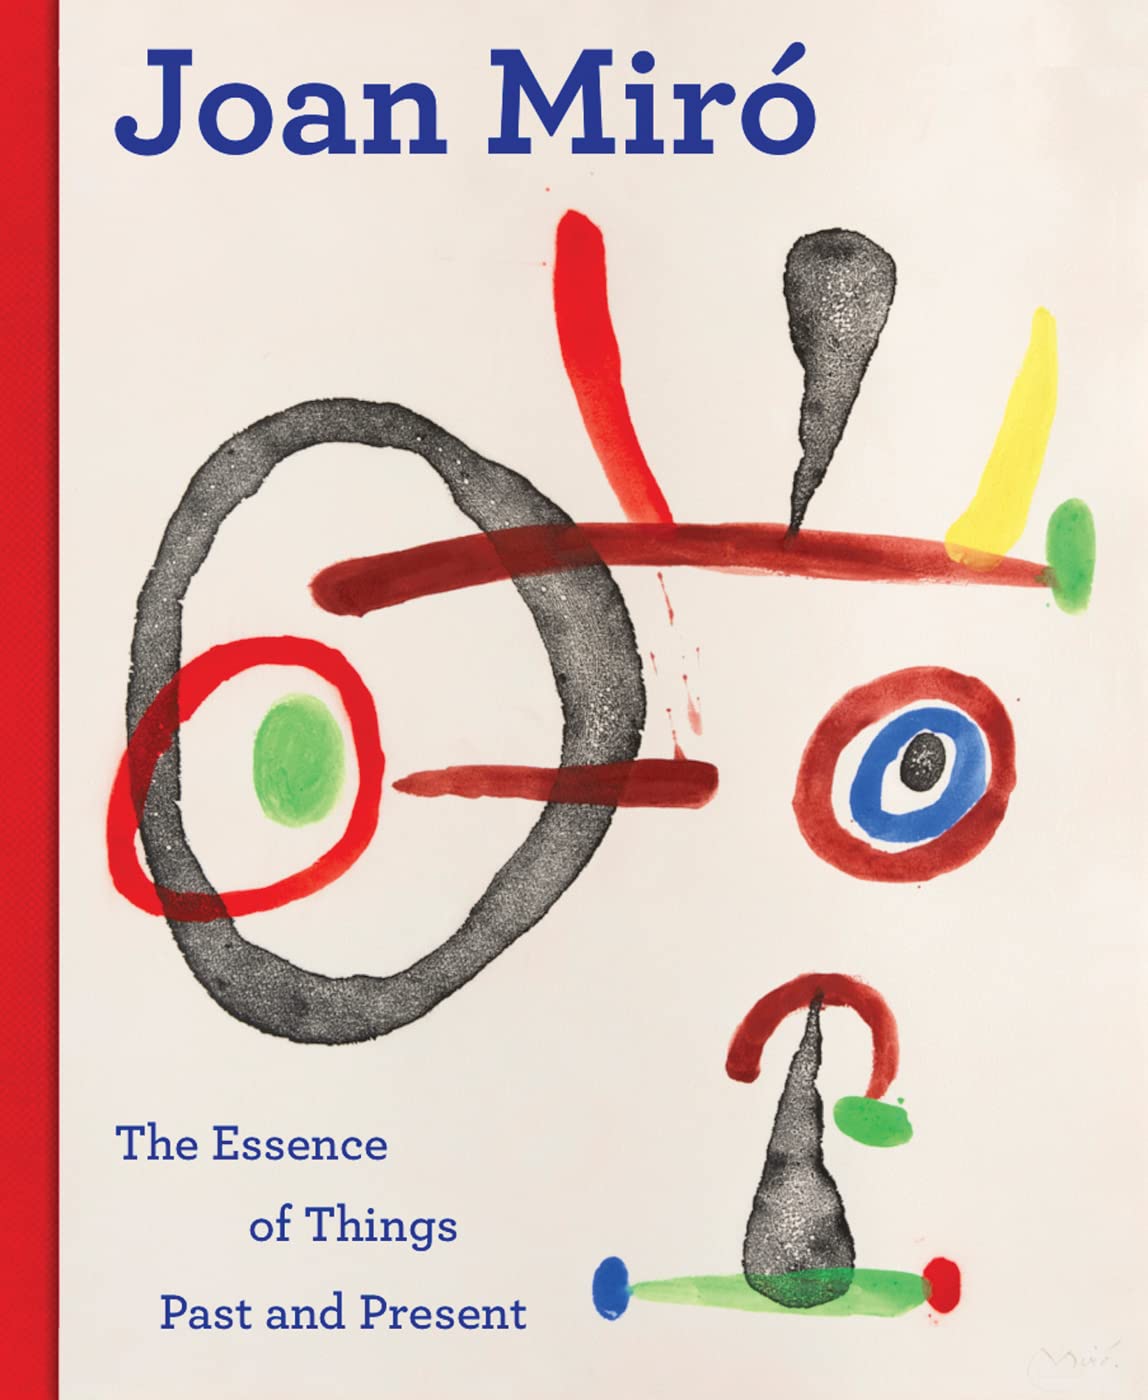 Joan Miro: The essence of past and present things